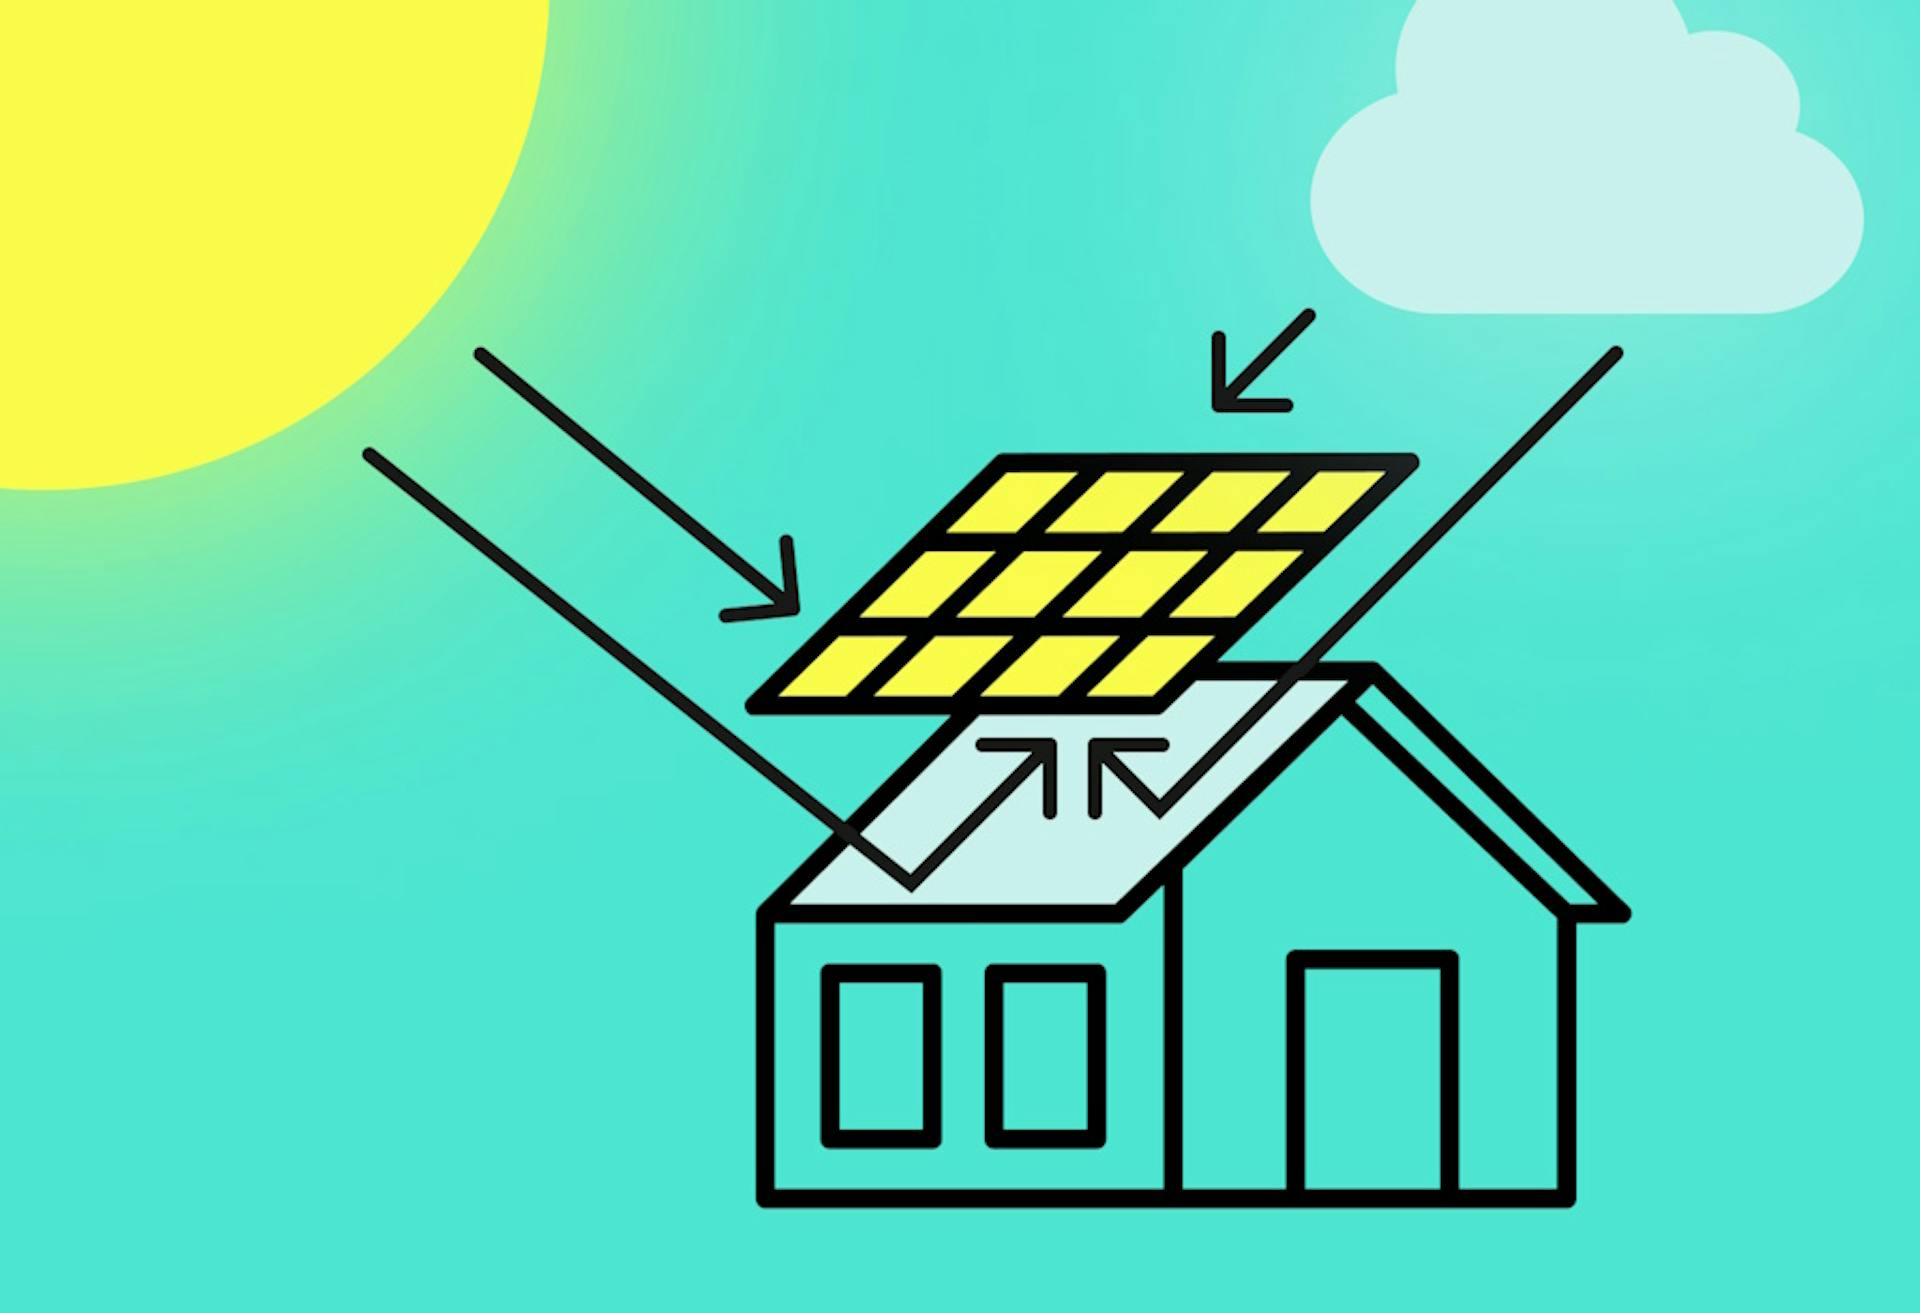 Graphic of a house's solar panel system receiving direct light from a sun on the left, and diffuse light from clouds on the right, against an aquamarine background